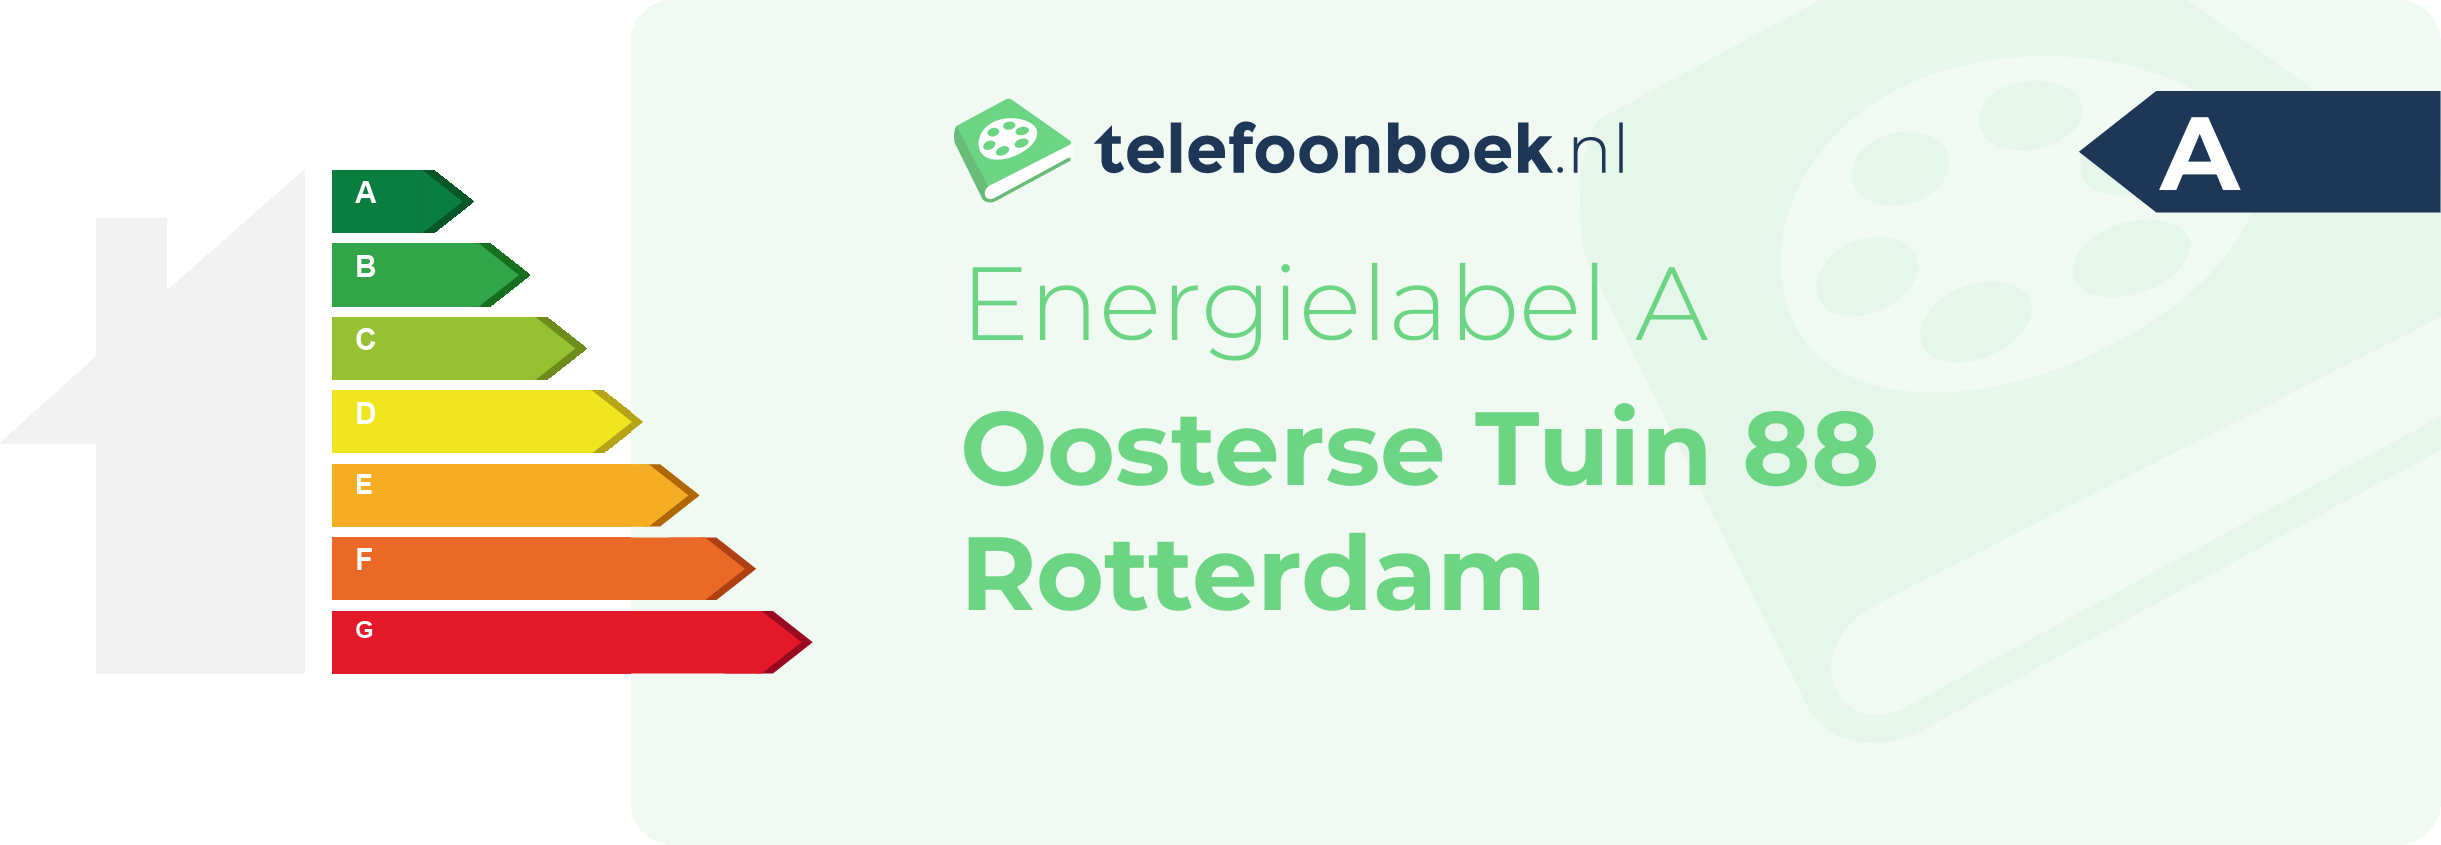 Energielabel Oosterse Tuin 88 Rotterdam